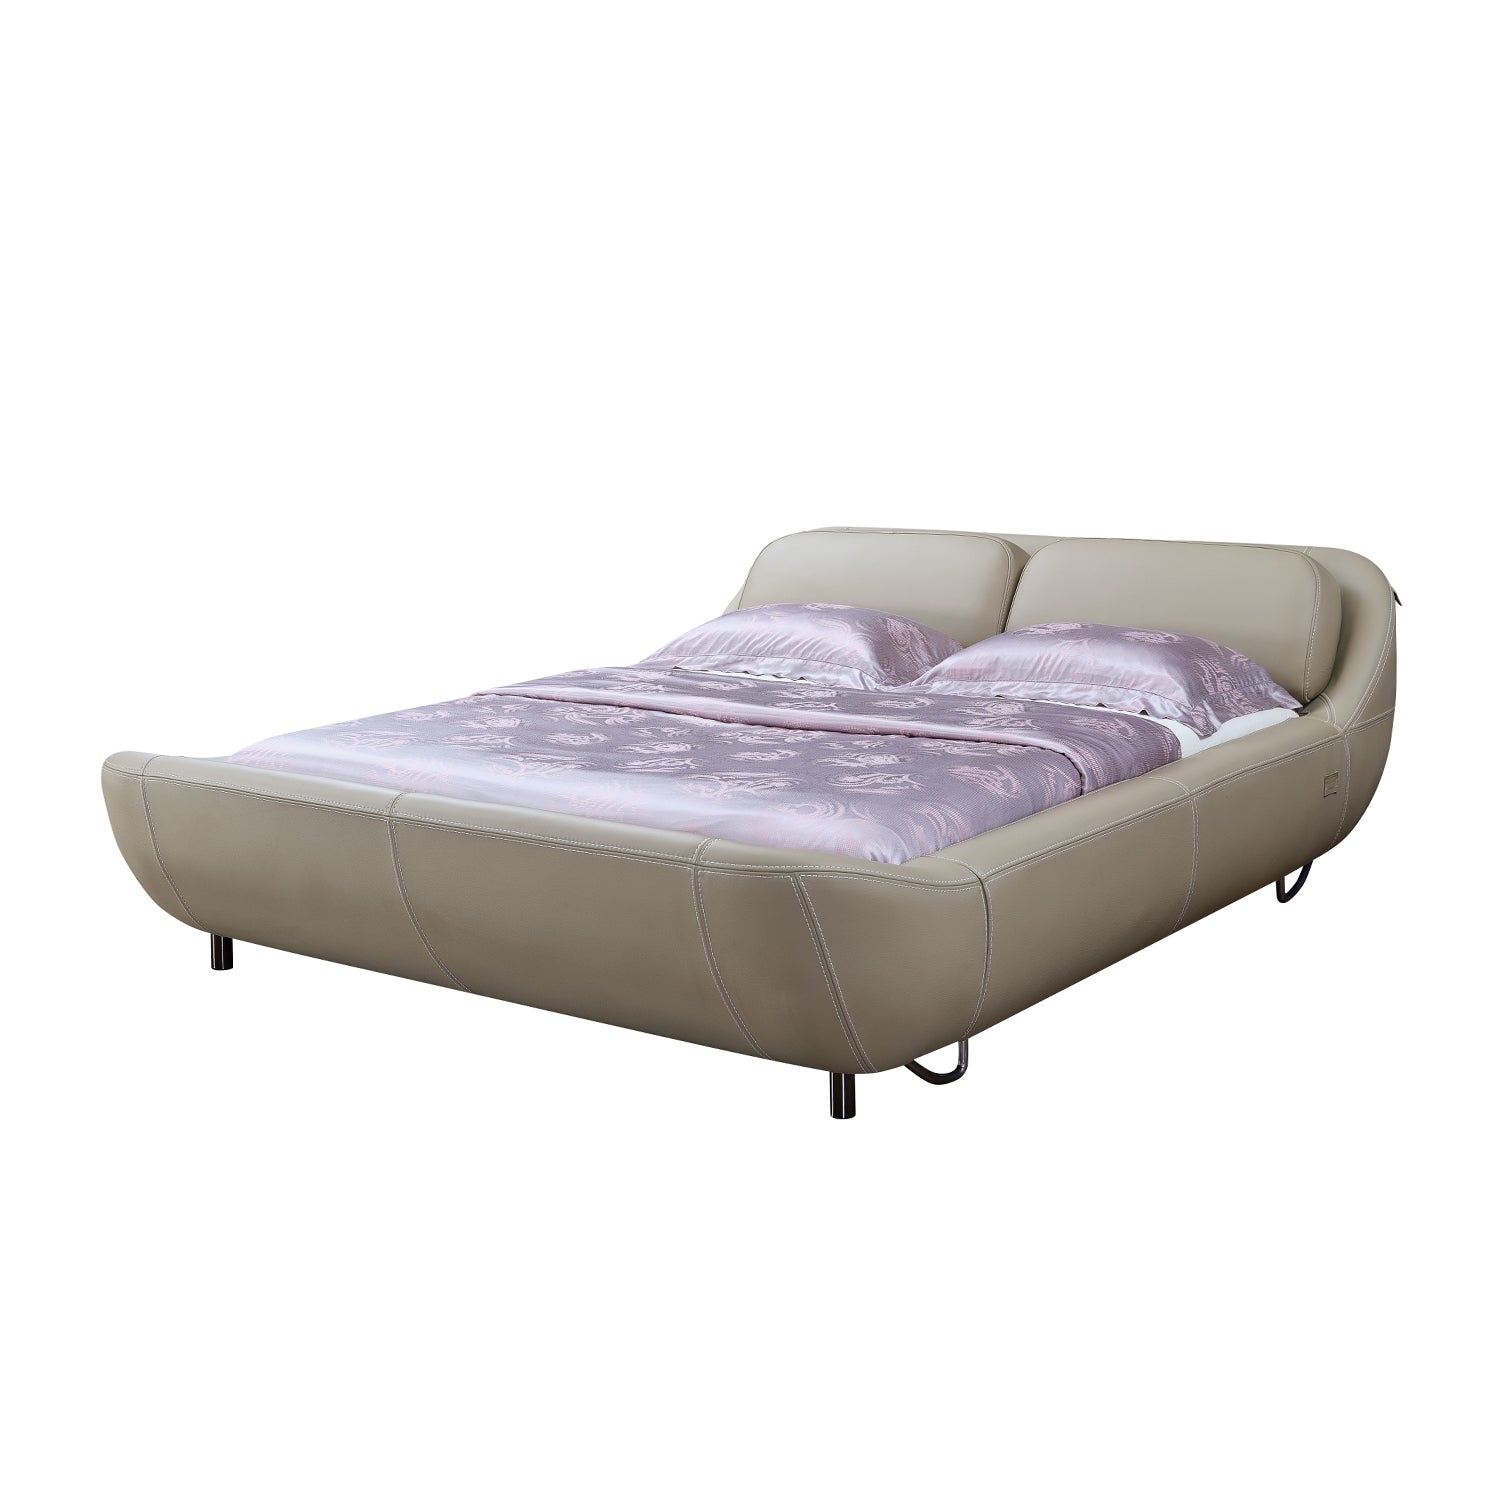 DeRUCCI Bed Frame BZZ4 - 024 with beige leather frame and lavender duvet, inspired by ancient Chinese treasures